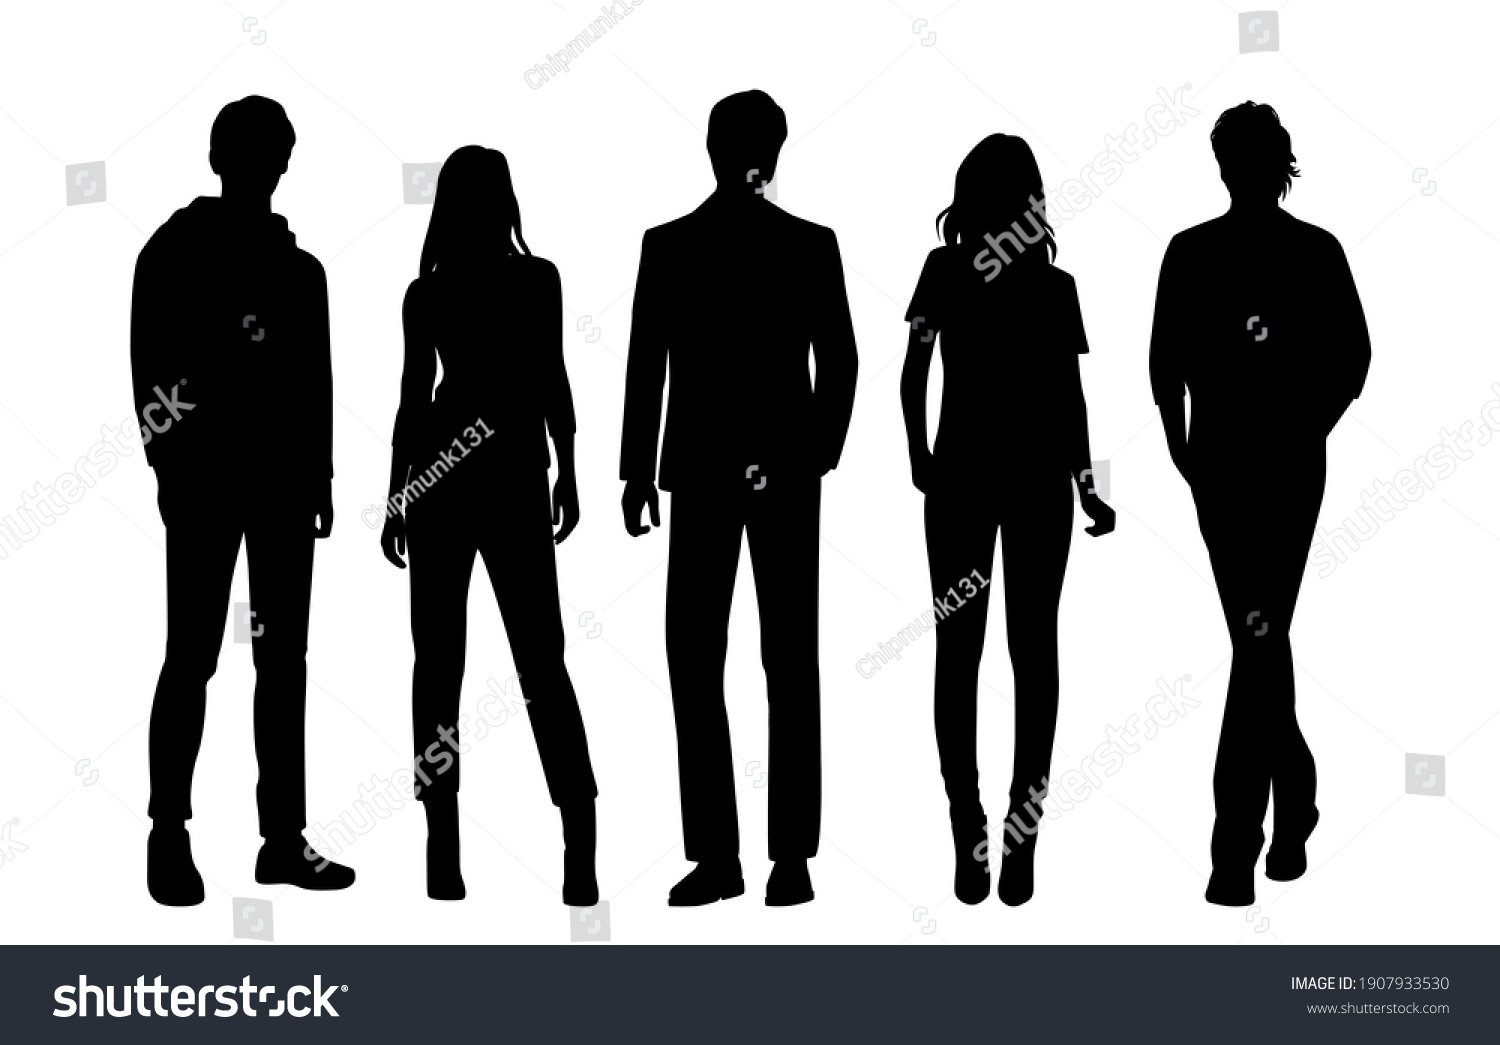 Vector silhouettes of  men and a women, a group of standing  business people, black  color isolated on white background #1907933530